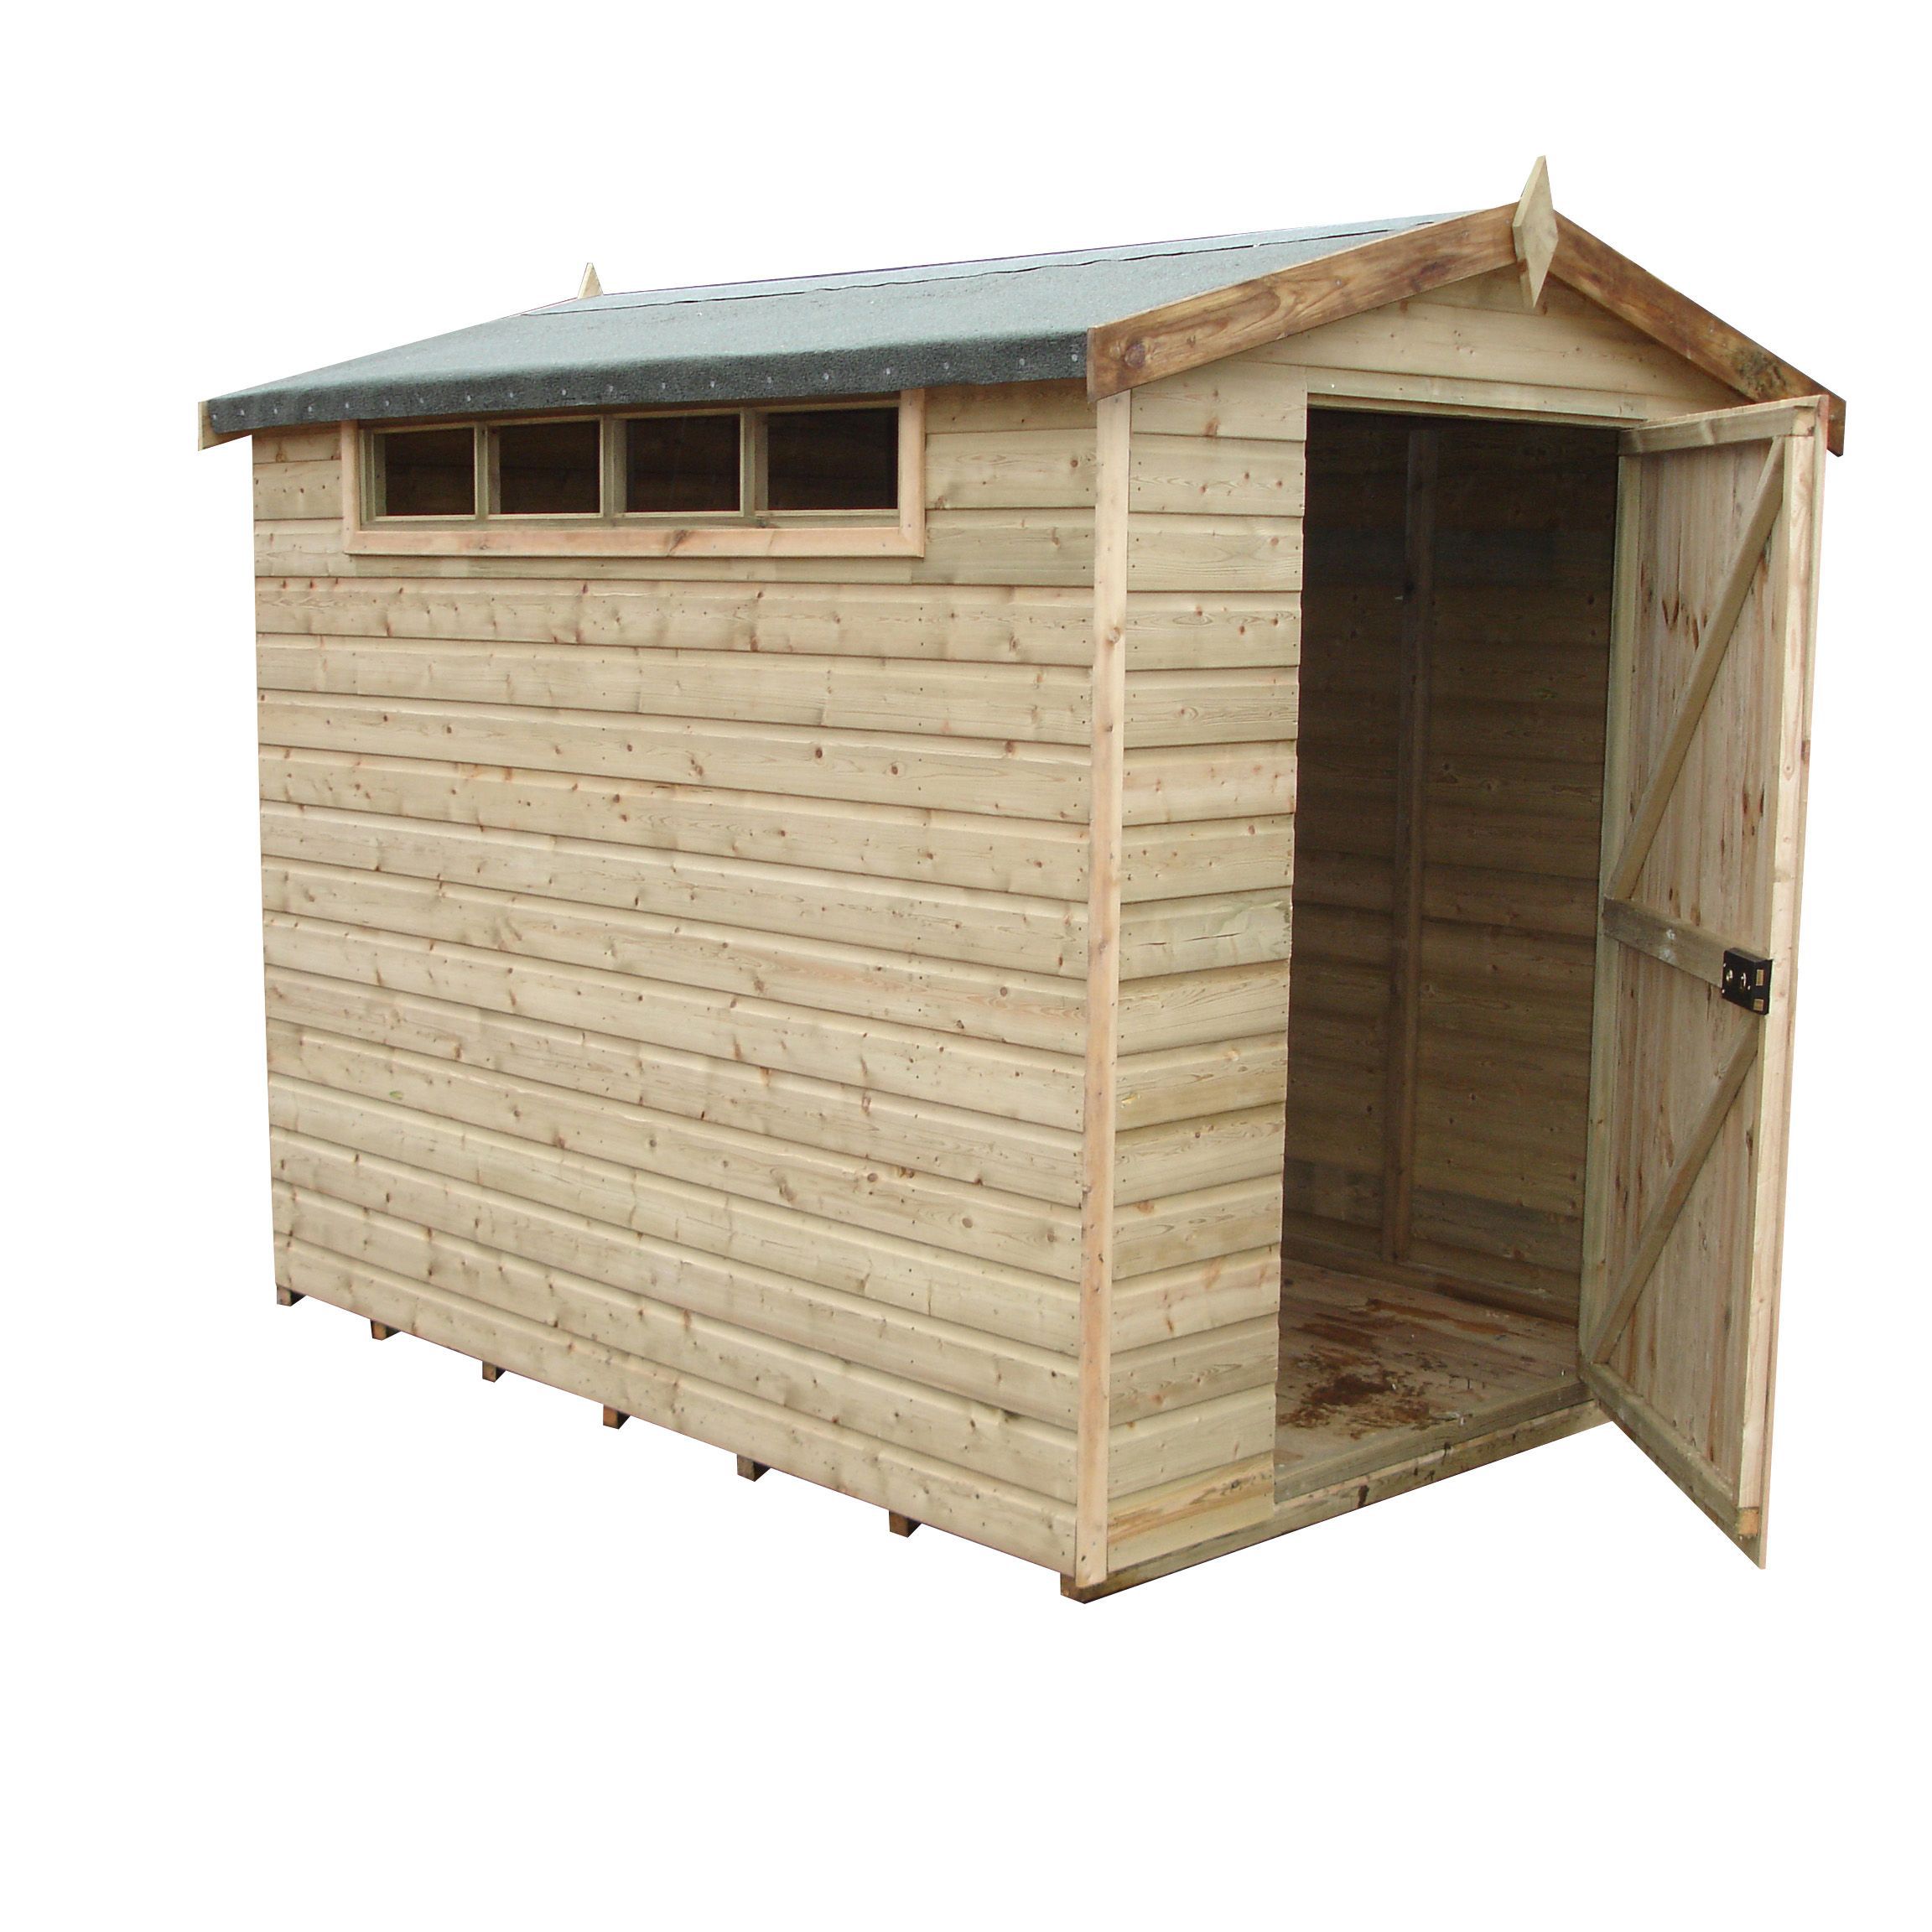 Shire 10x10 Apex Shed - Base not includedAssembly service included